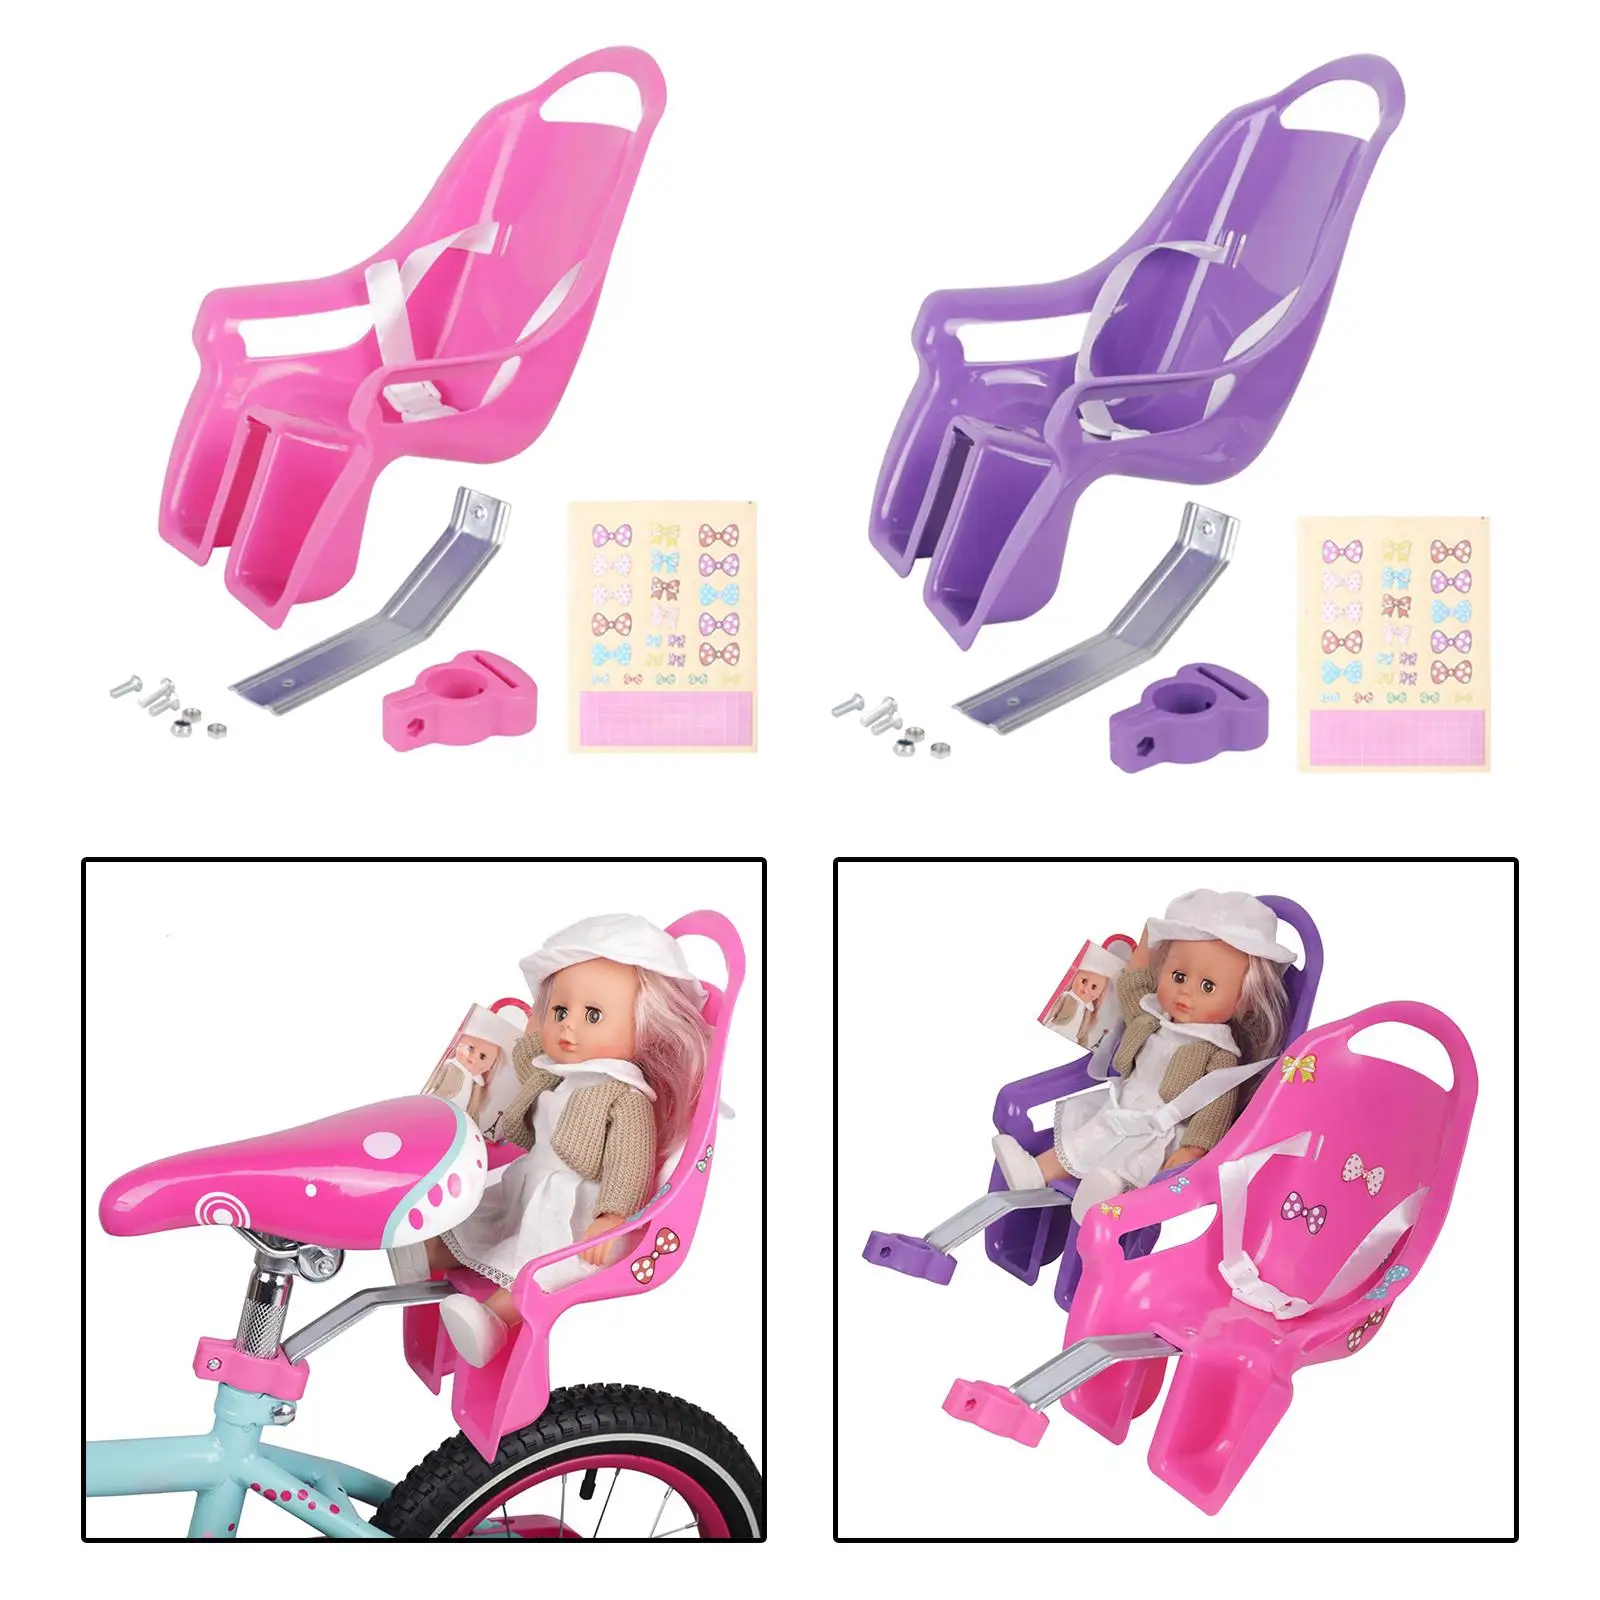 Girls Bike Doll Seat Bicycle Accessories with DIY Decals Bike Decoration for Girls